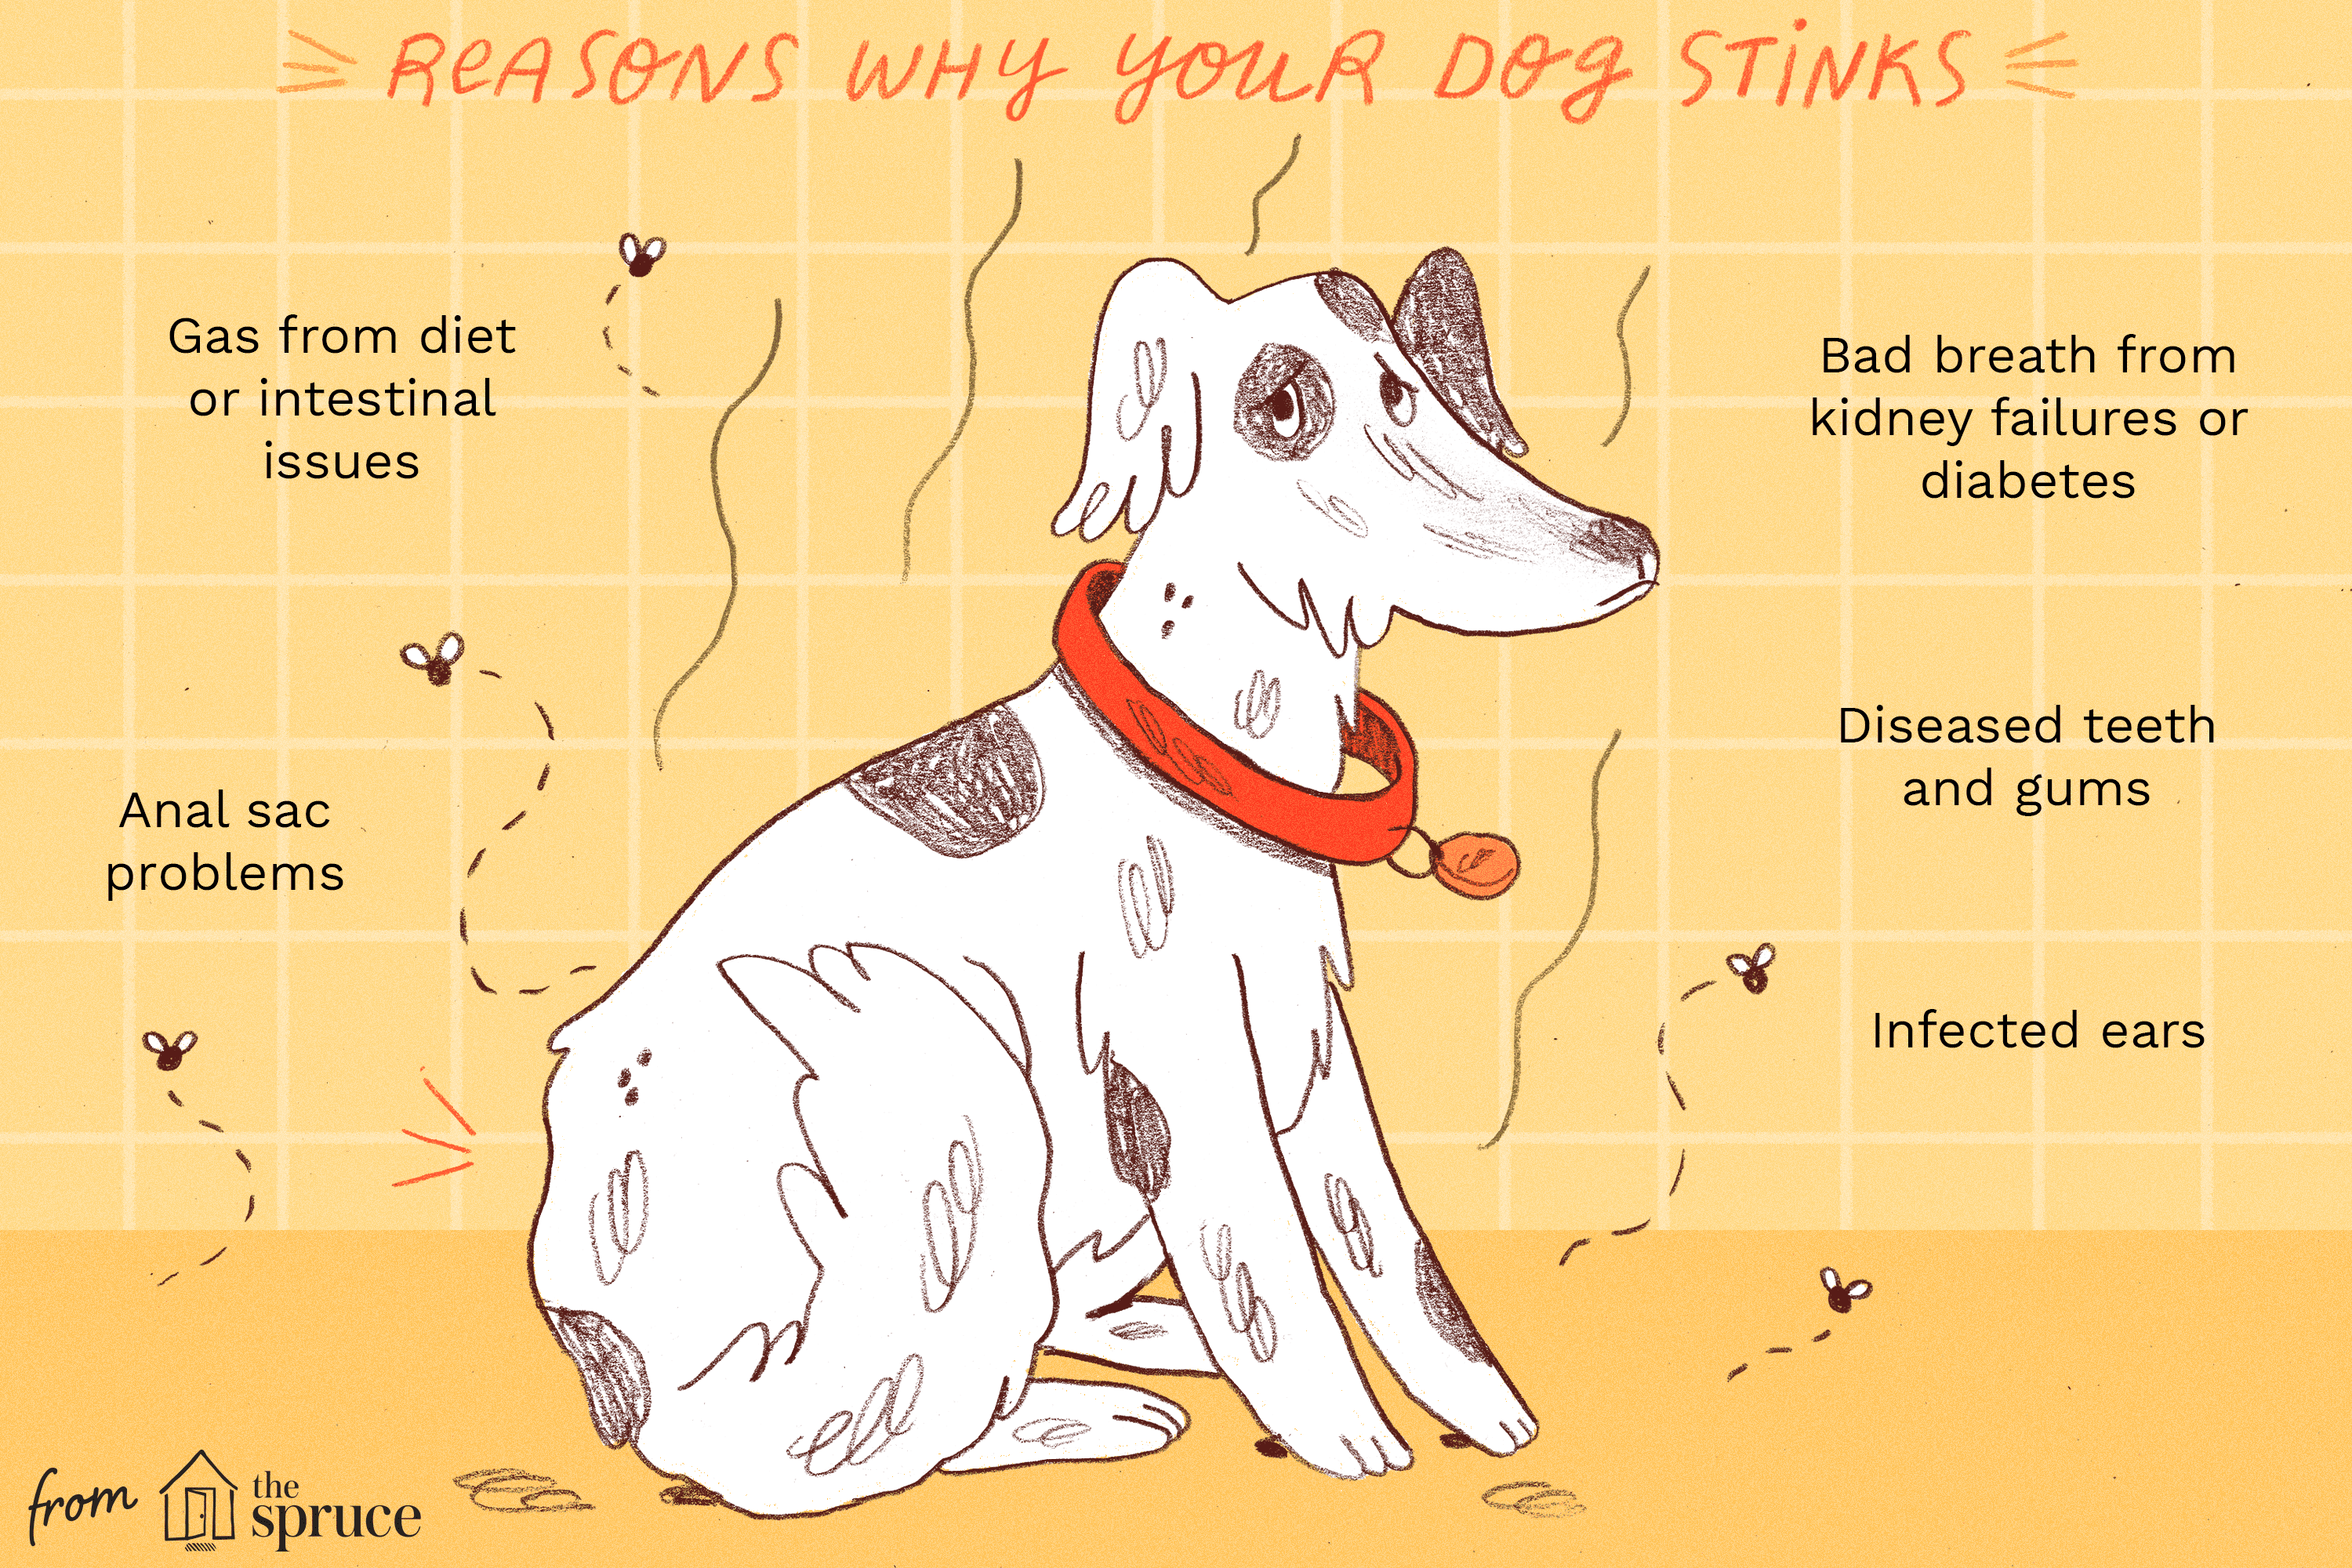 Illustration of reasons why your dog stinks